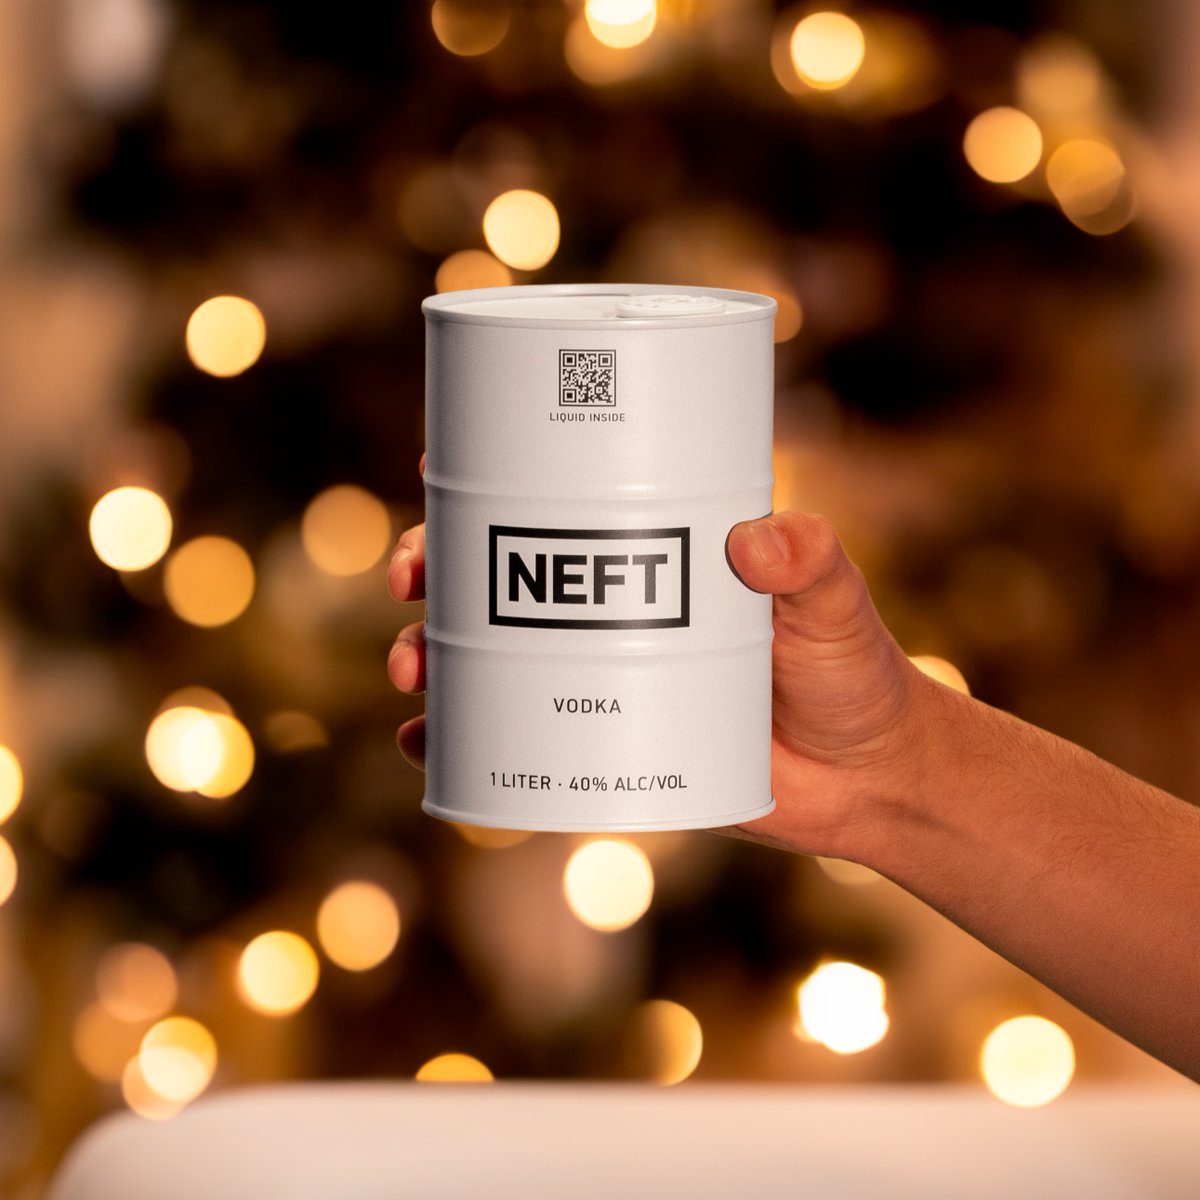 The gift everybody wants under their tree! Check our 'Where to Buy' page at the link in our bio to see where you can pick up a barrel of NEFT near you 🎁 #NEFTVodka #GiftingSeason